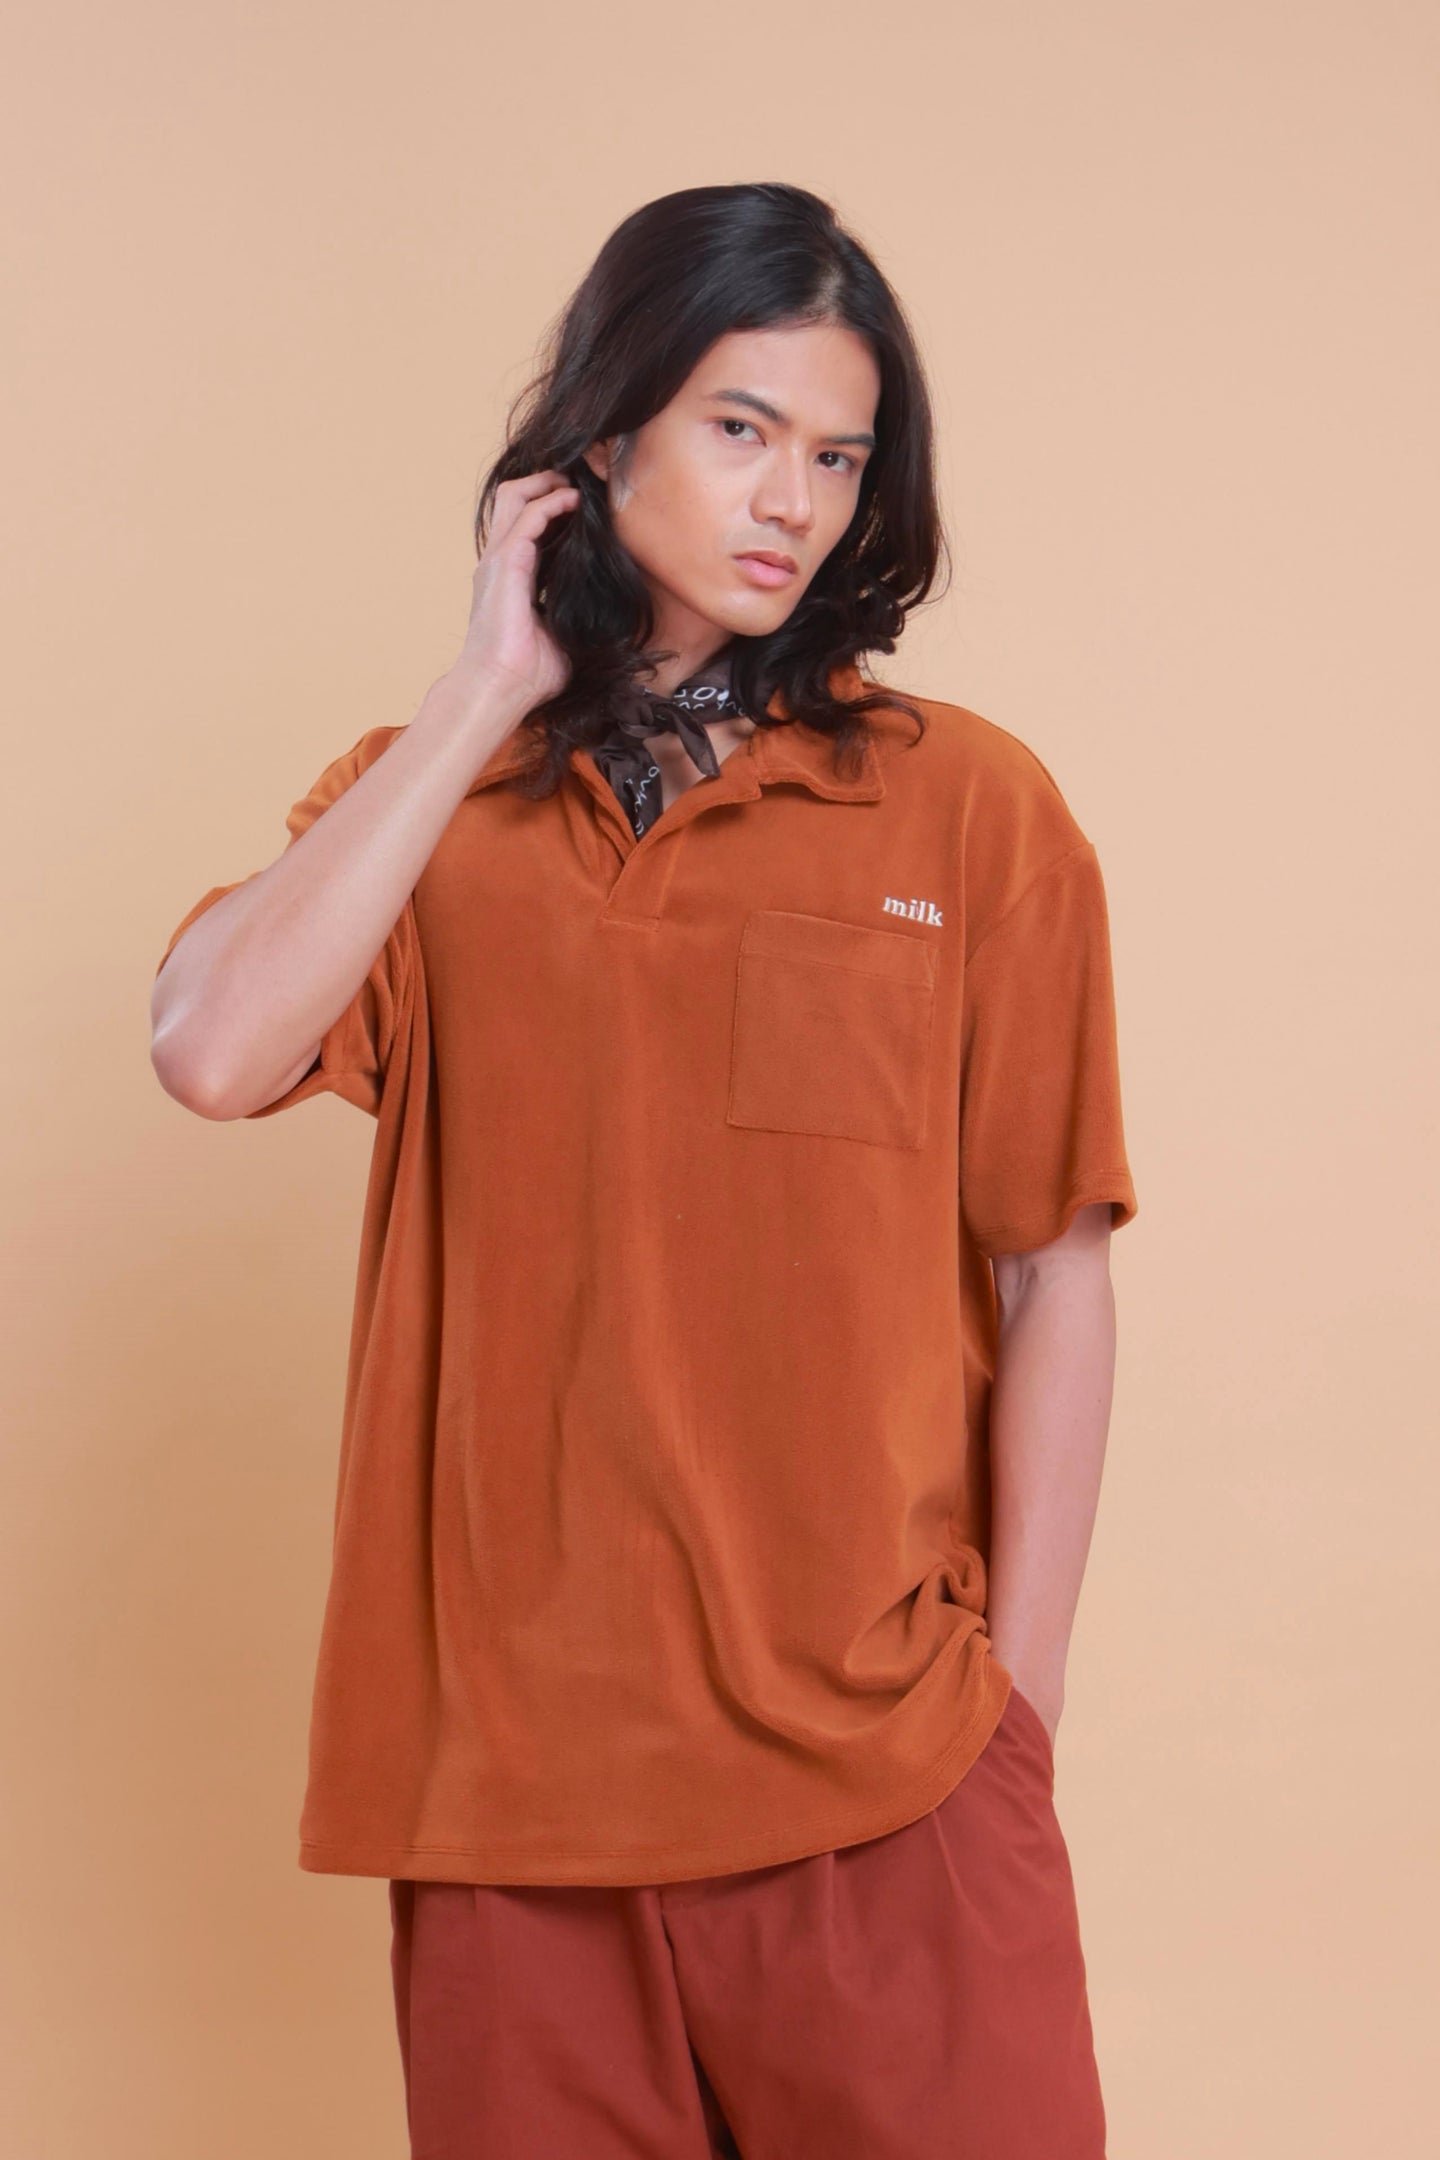 Milk Towel Terry Polo in Brown